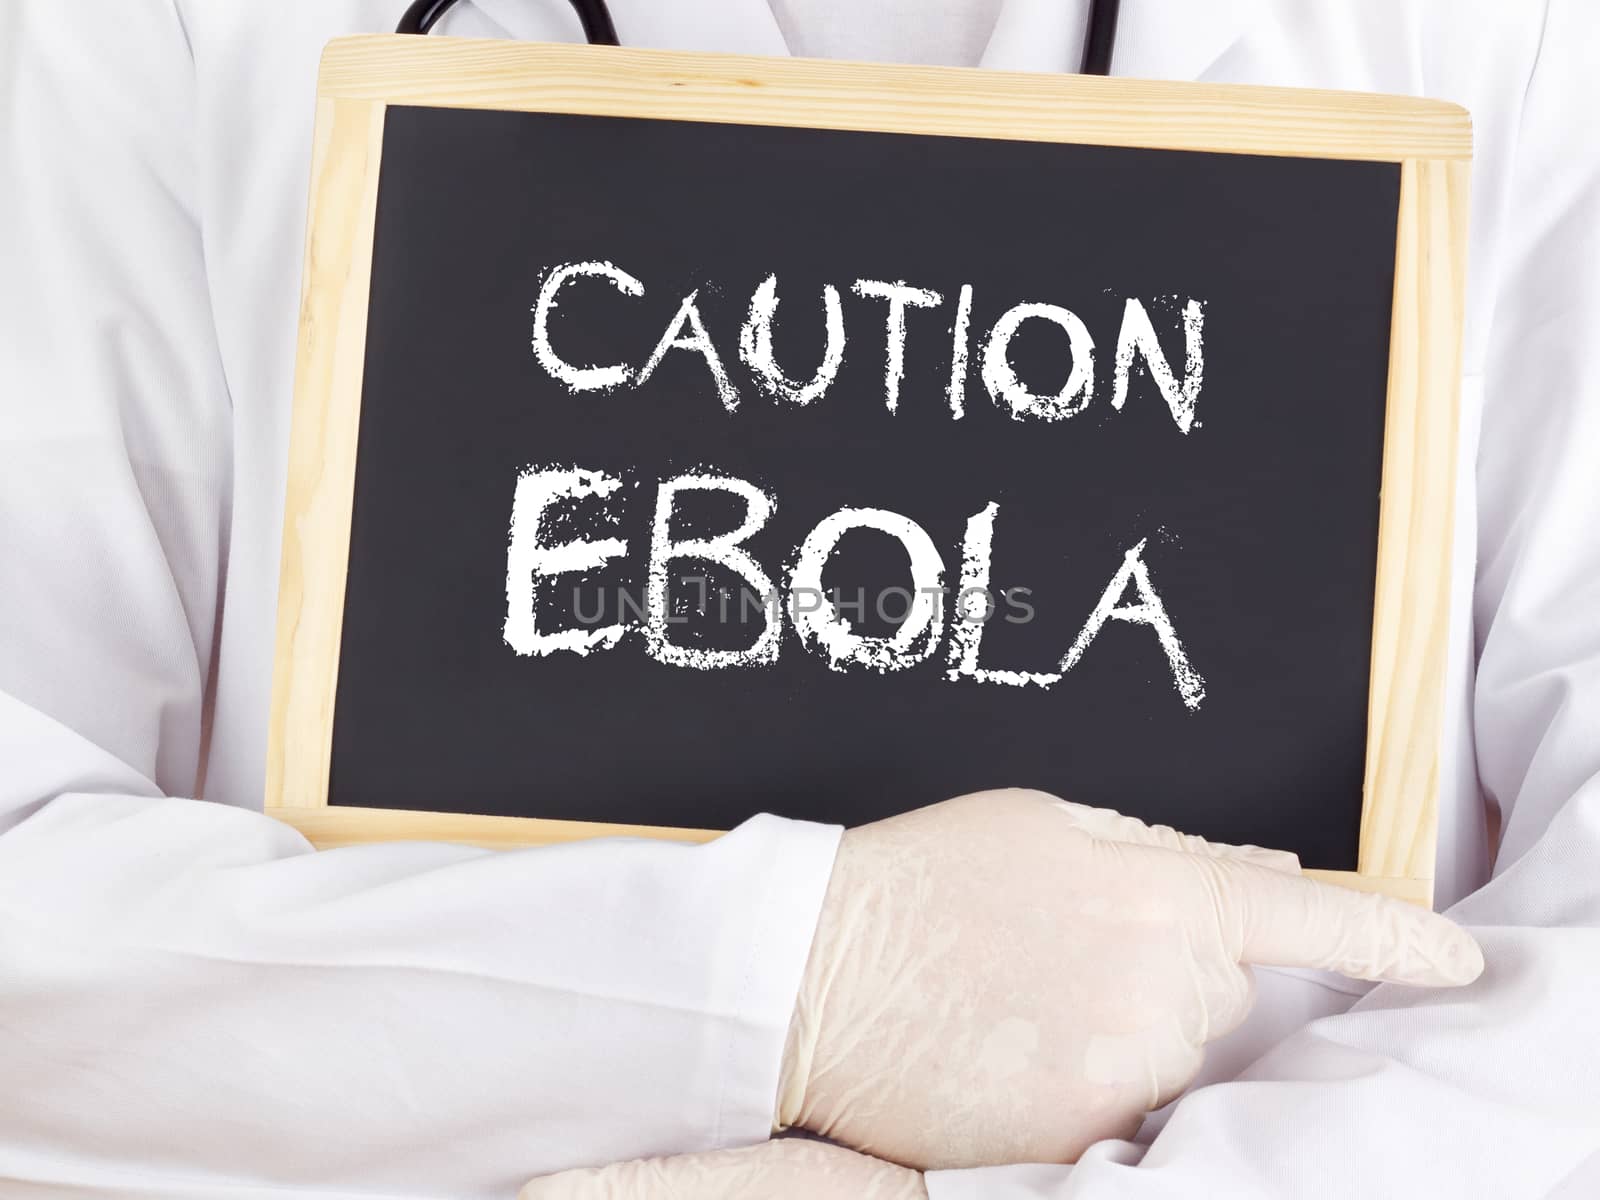 Doctor shows information: Ebola caution